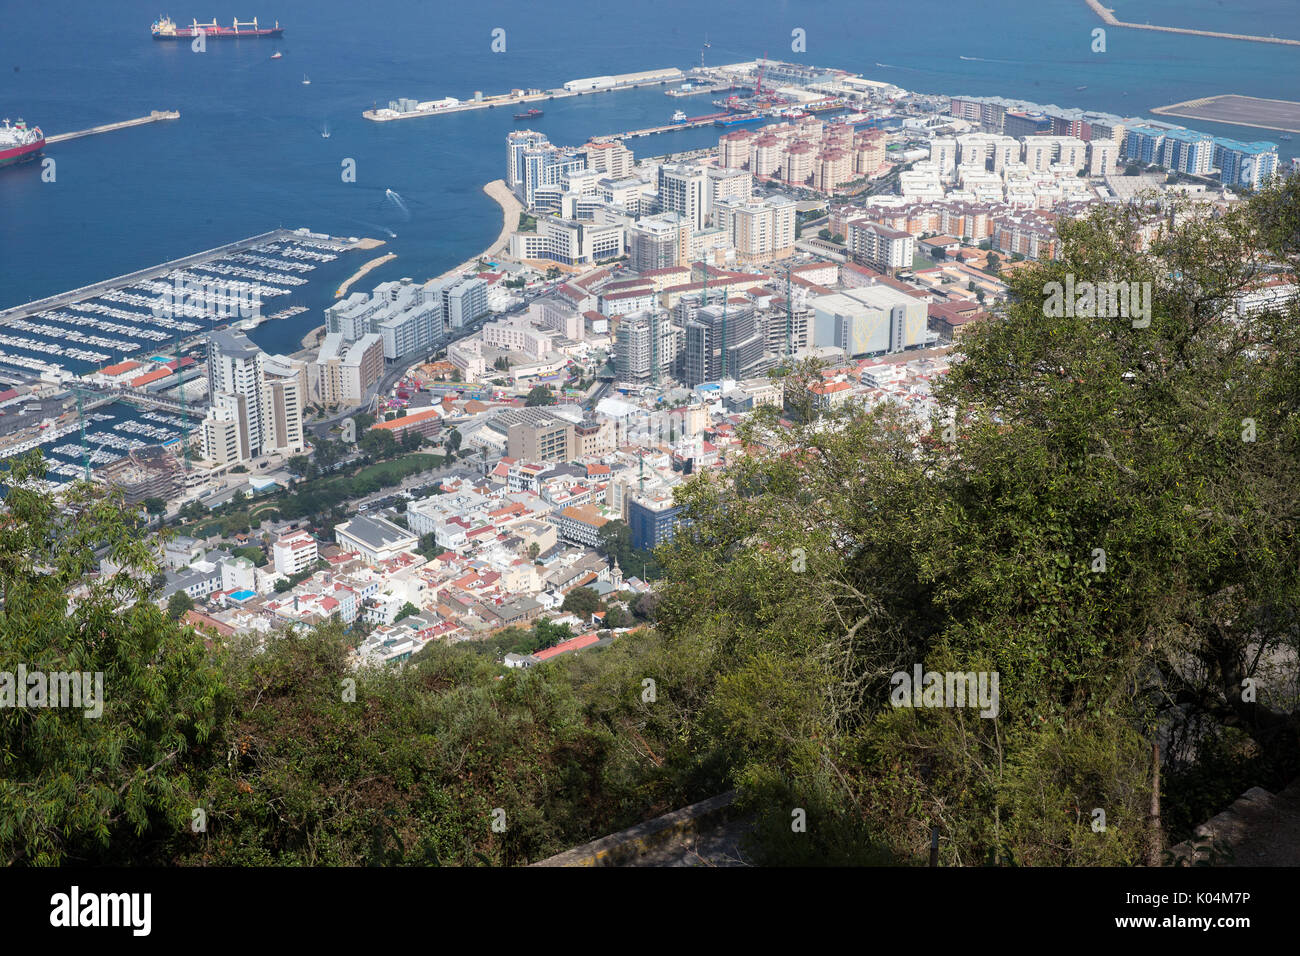 View of Gibraltar from the cable car viewing platform. The British overseas territory has a population of around 30,000 people. Stock Photo